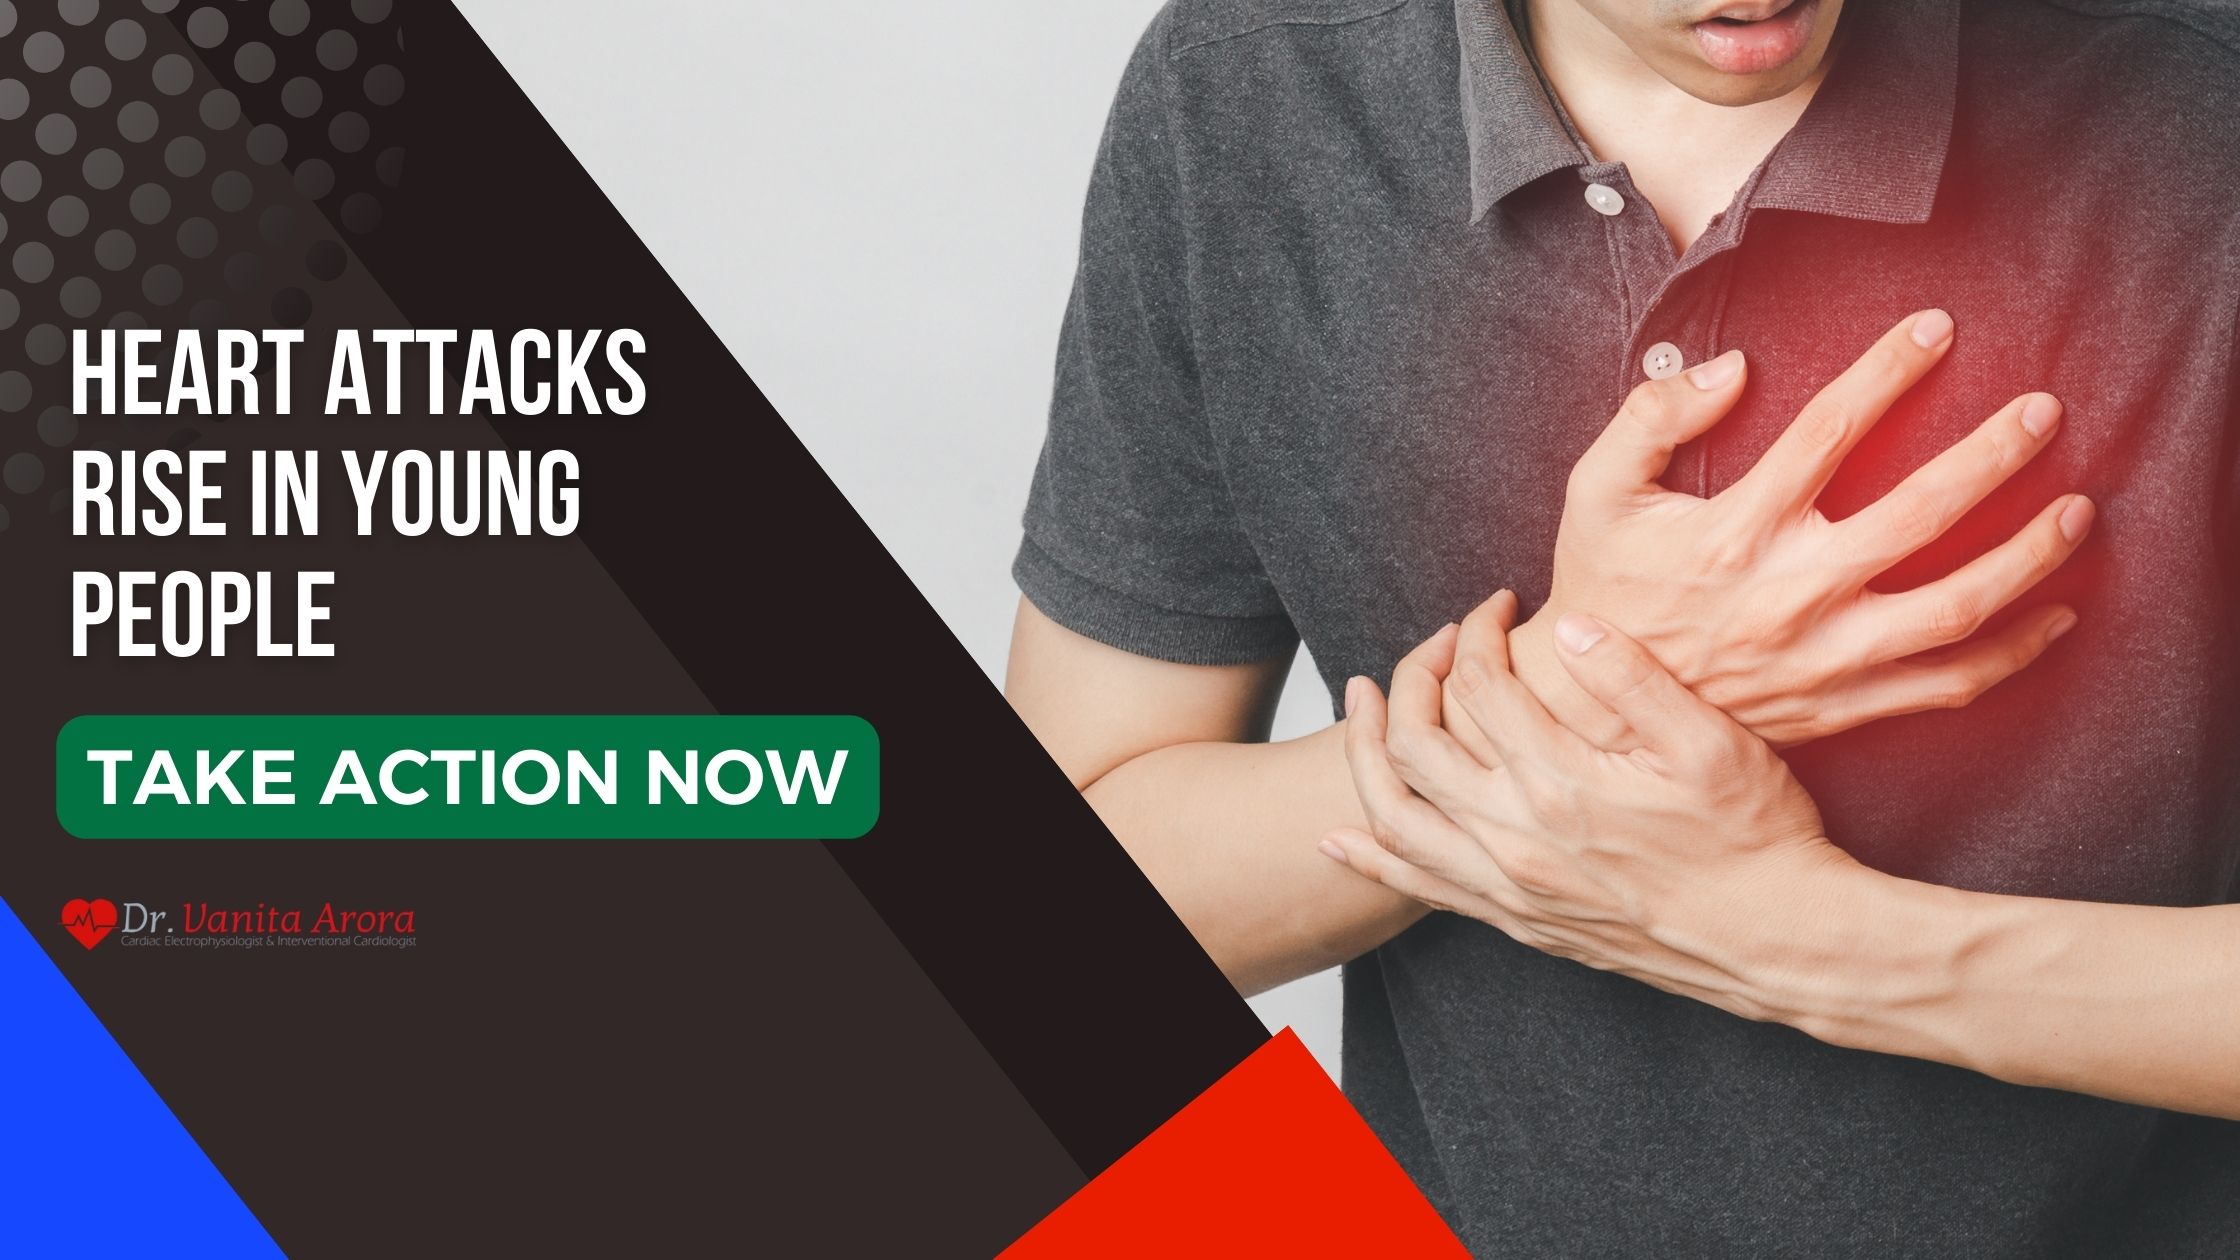 Heart attacks rise in Young People: Take action now